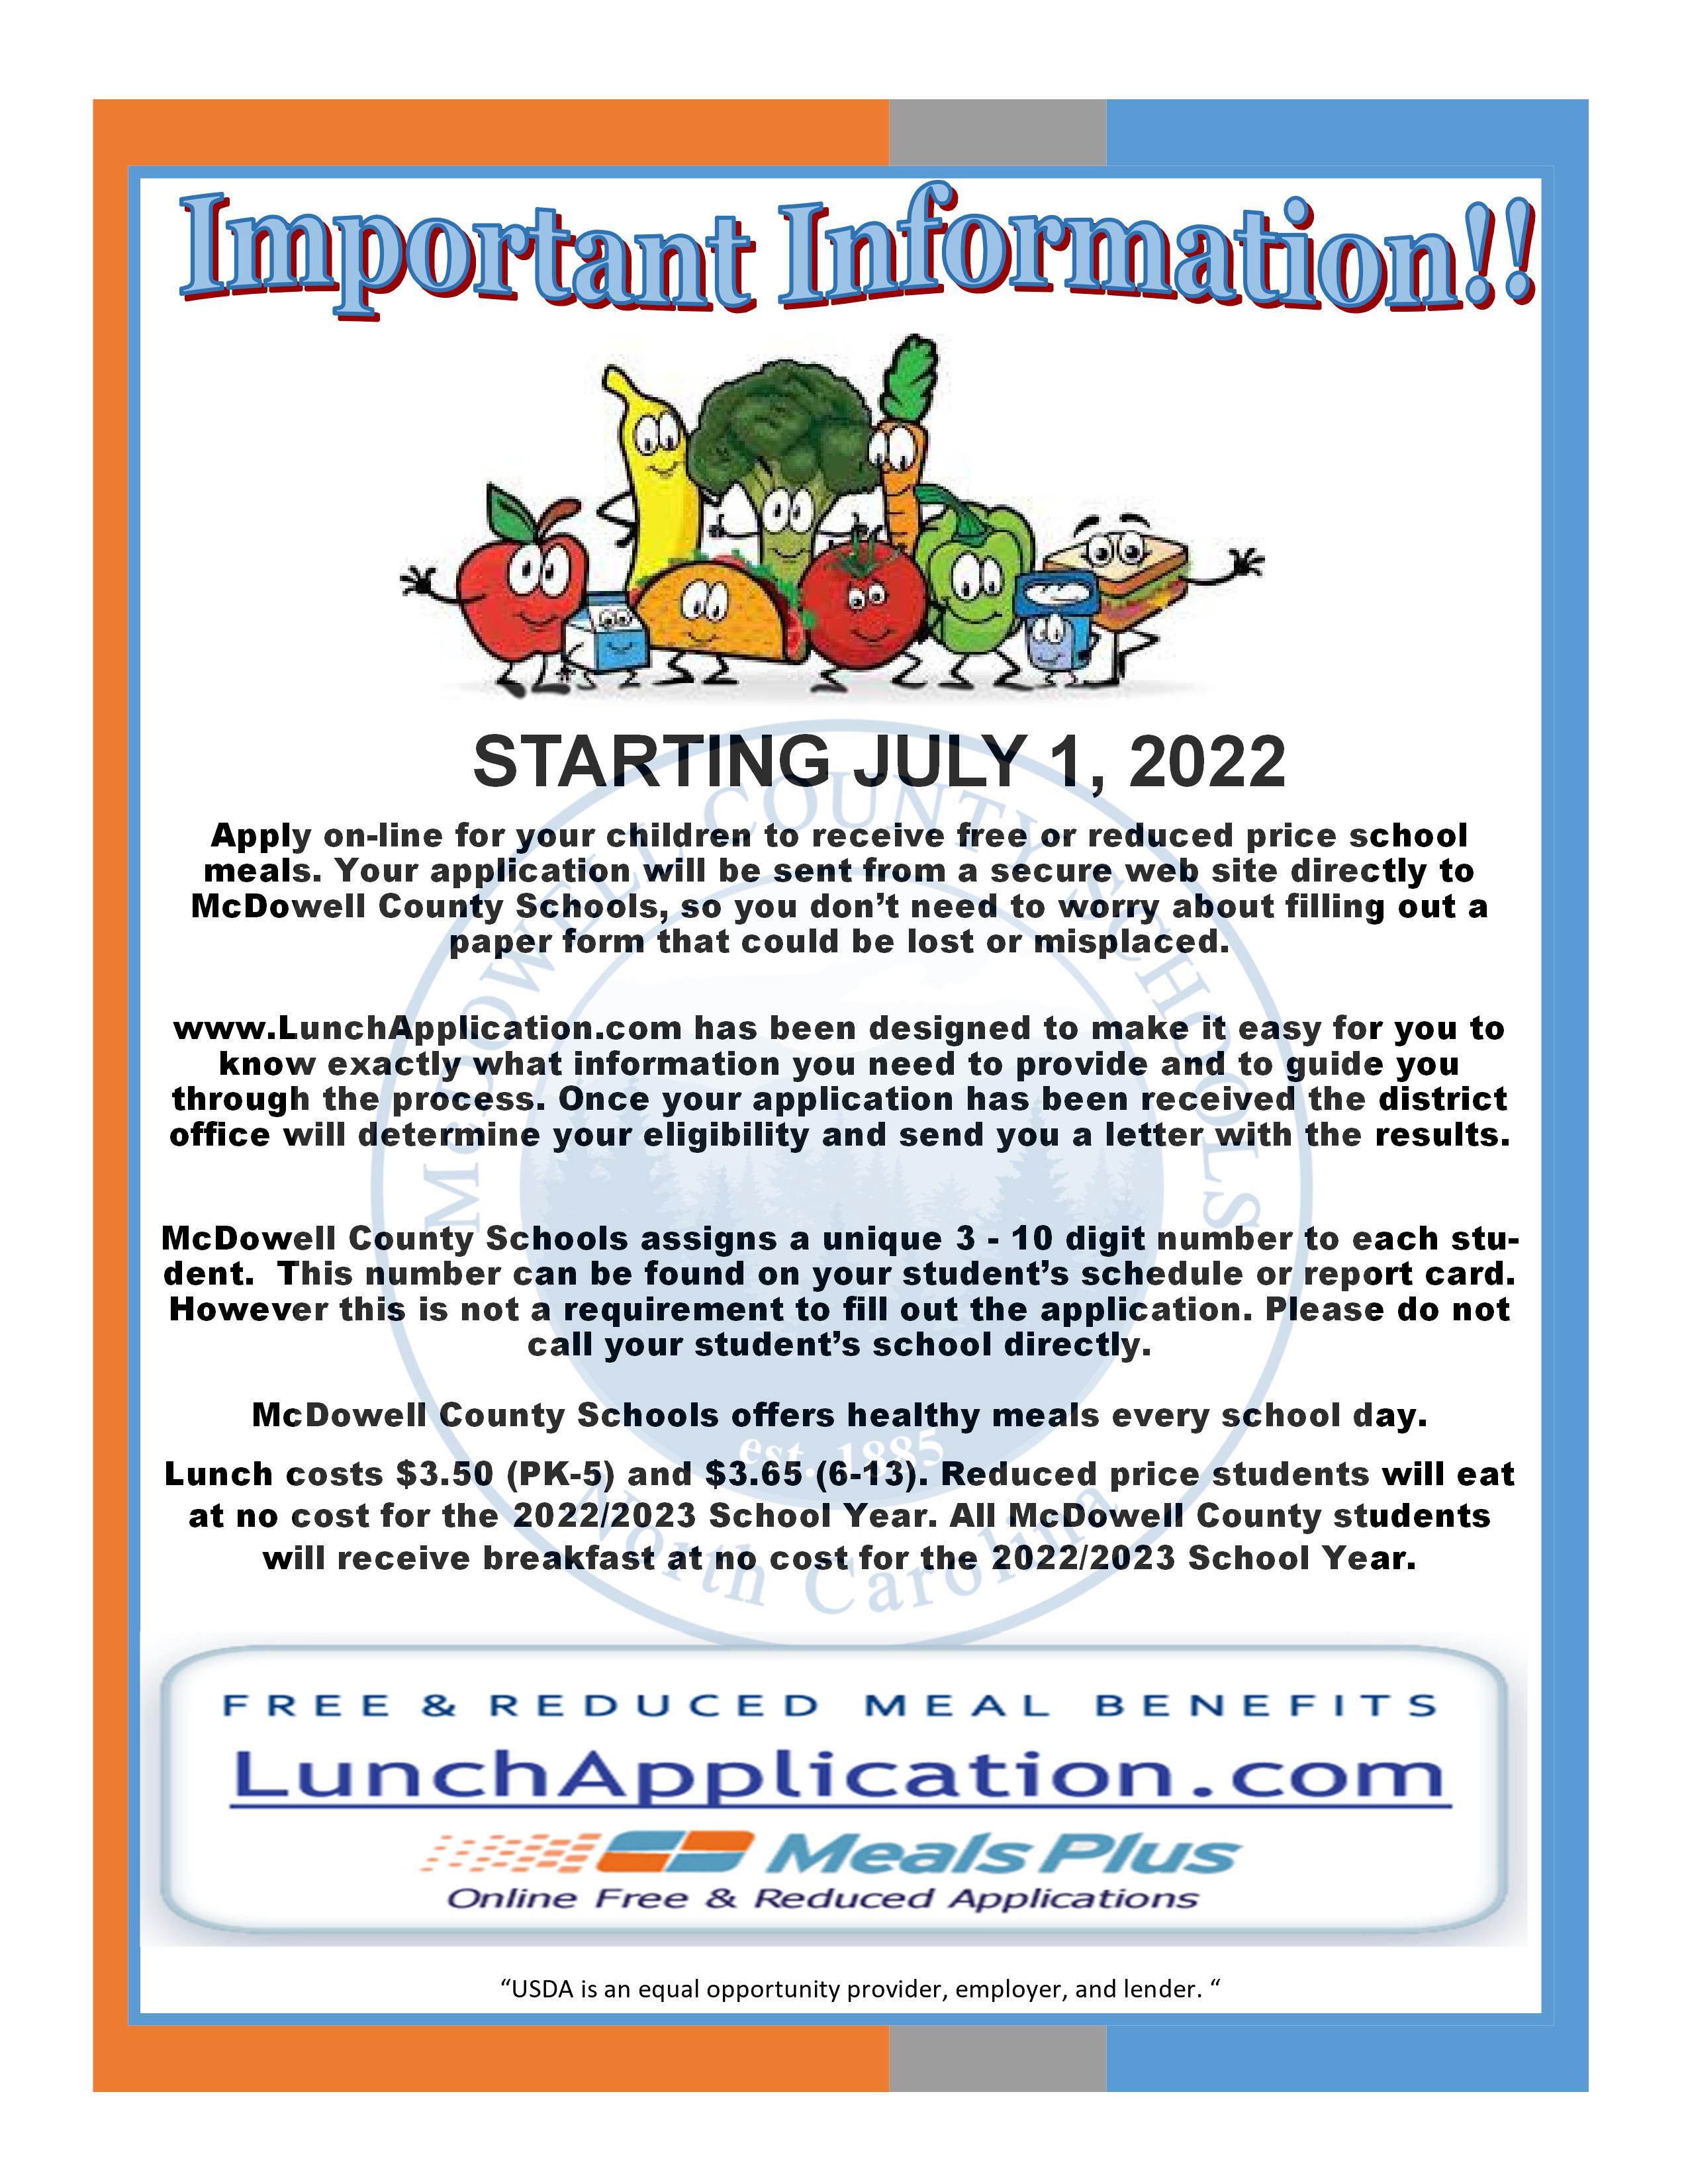 Information on free and reduced lunches